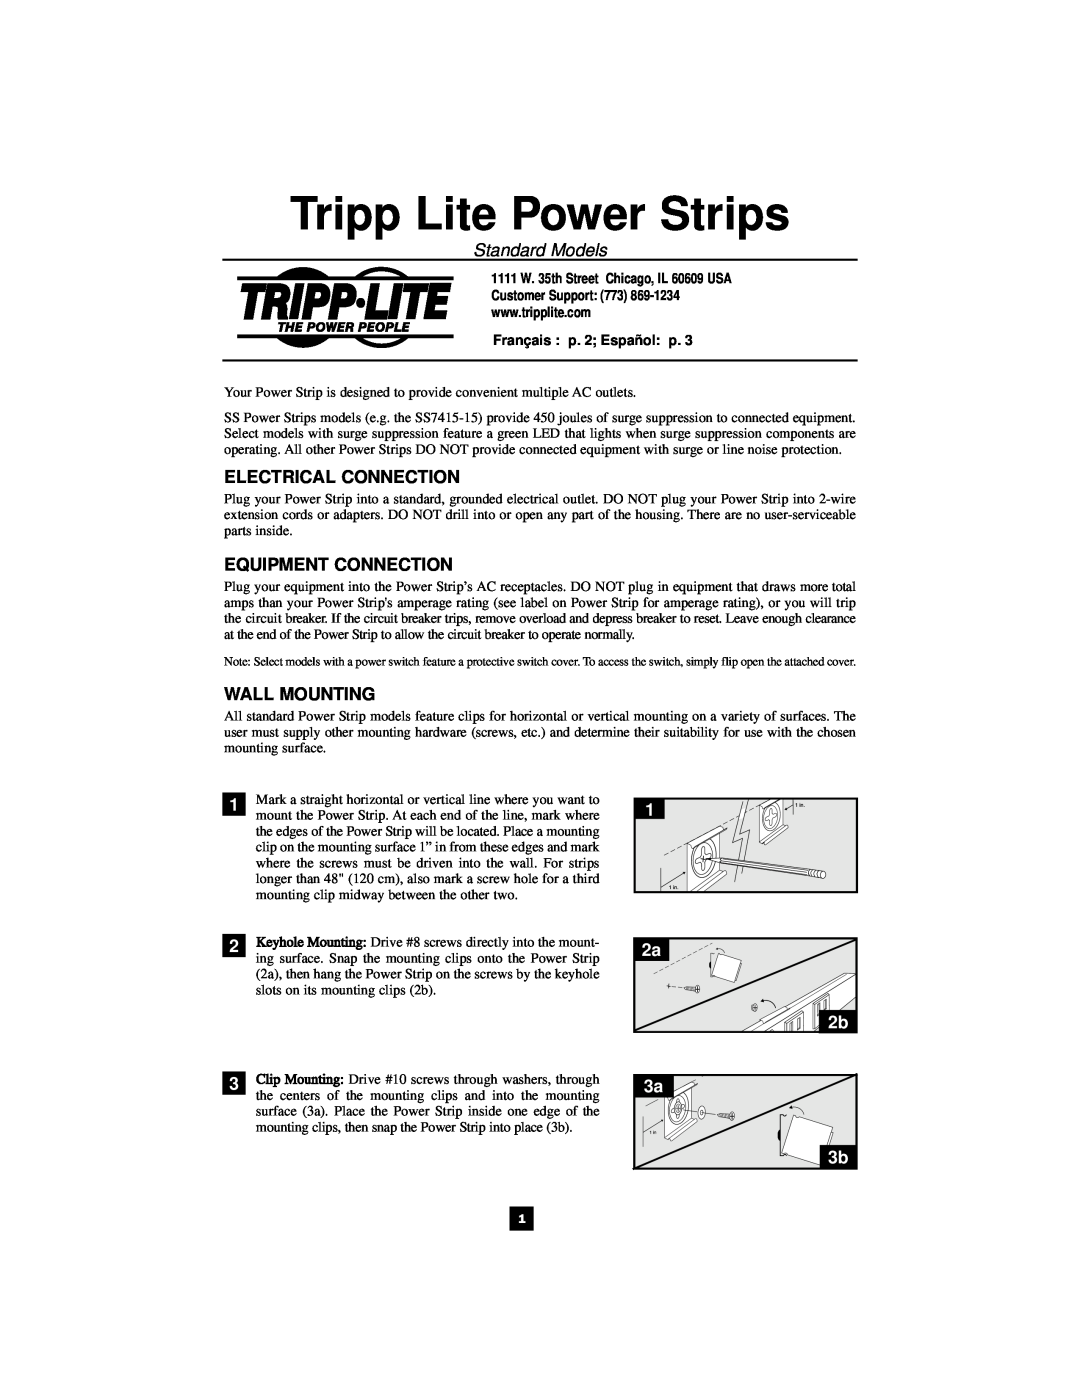 Tripp Lite 932005 user service Standard Models, Electrical Connection, Equipment Connection, Wall Mounting, 2a 2b 3a 3b 